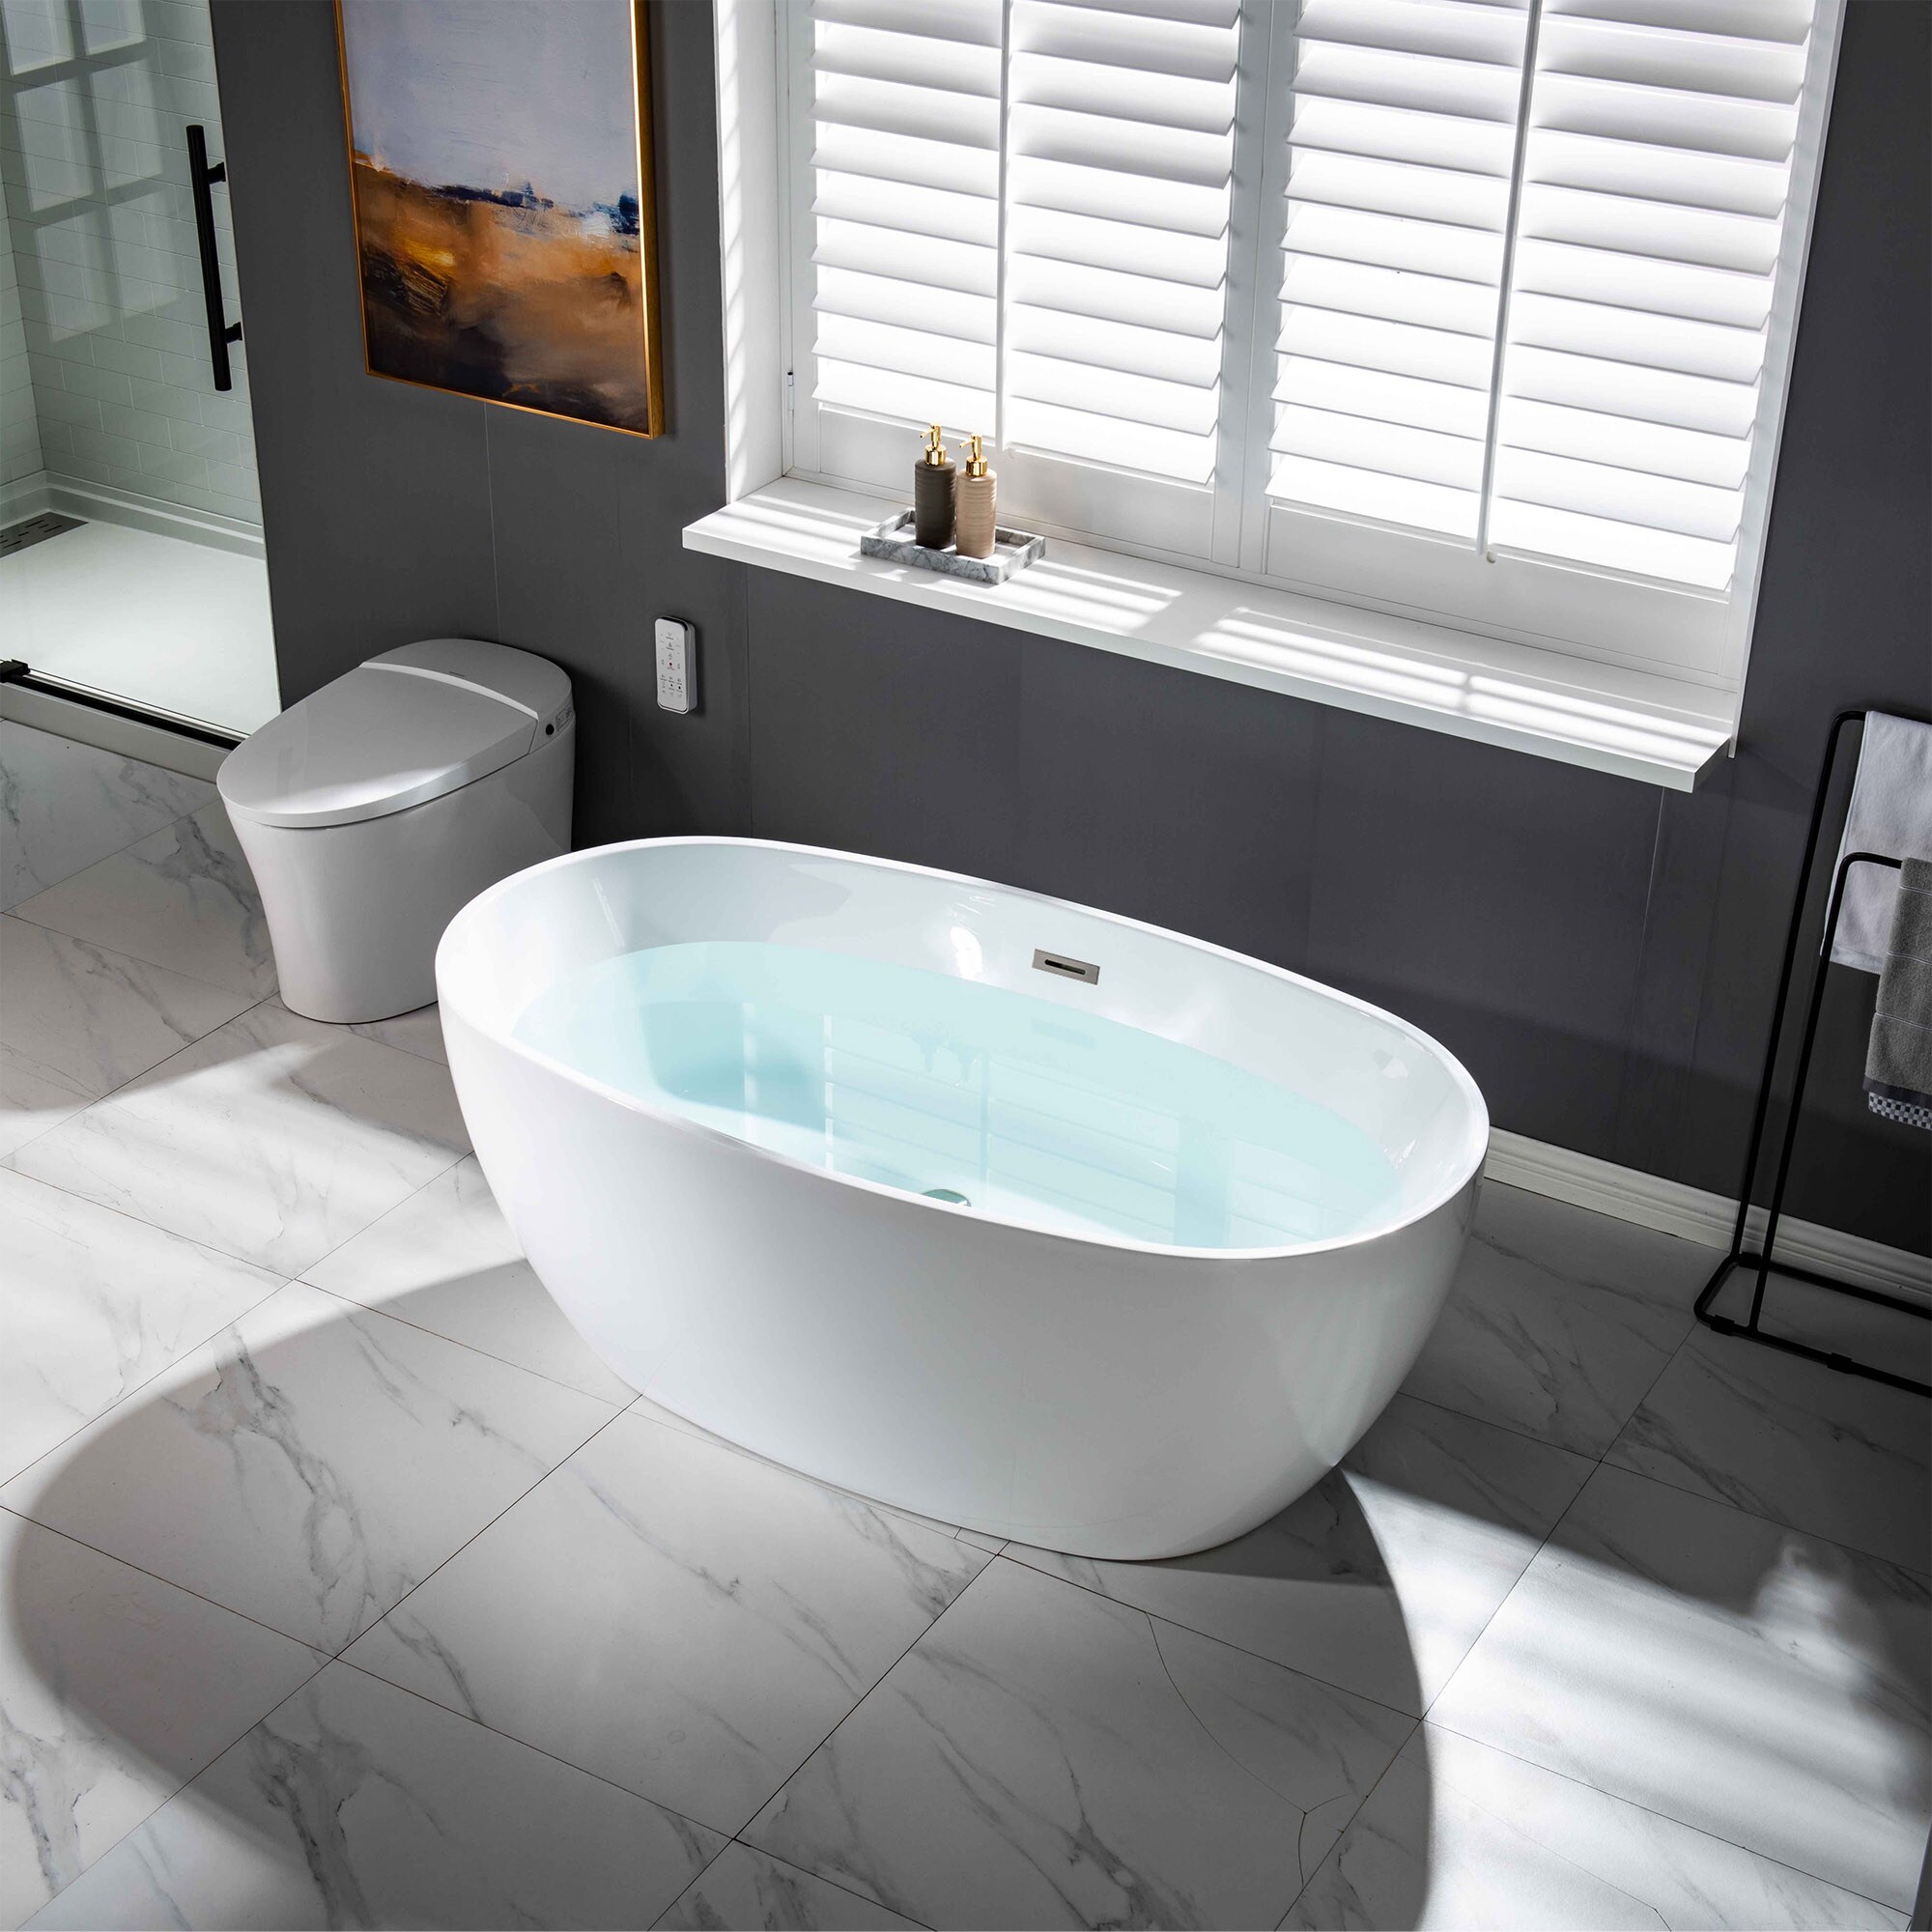 Woodbridge Arras 31.5-in W x 59-in L White with Brushed Nickel Trim Acrylic  Oval Center Drain Freestanding Soaking Bathtub (Drain Included)